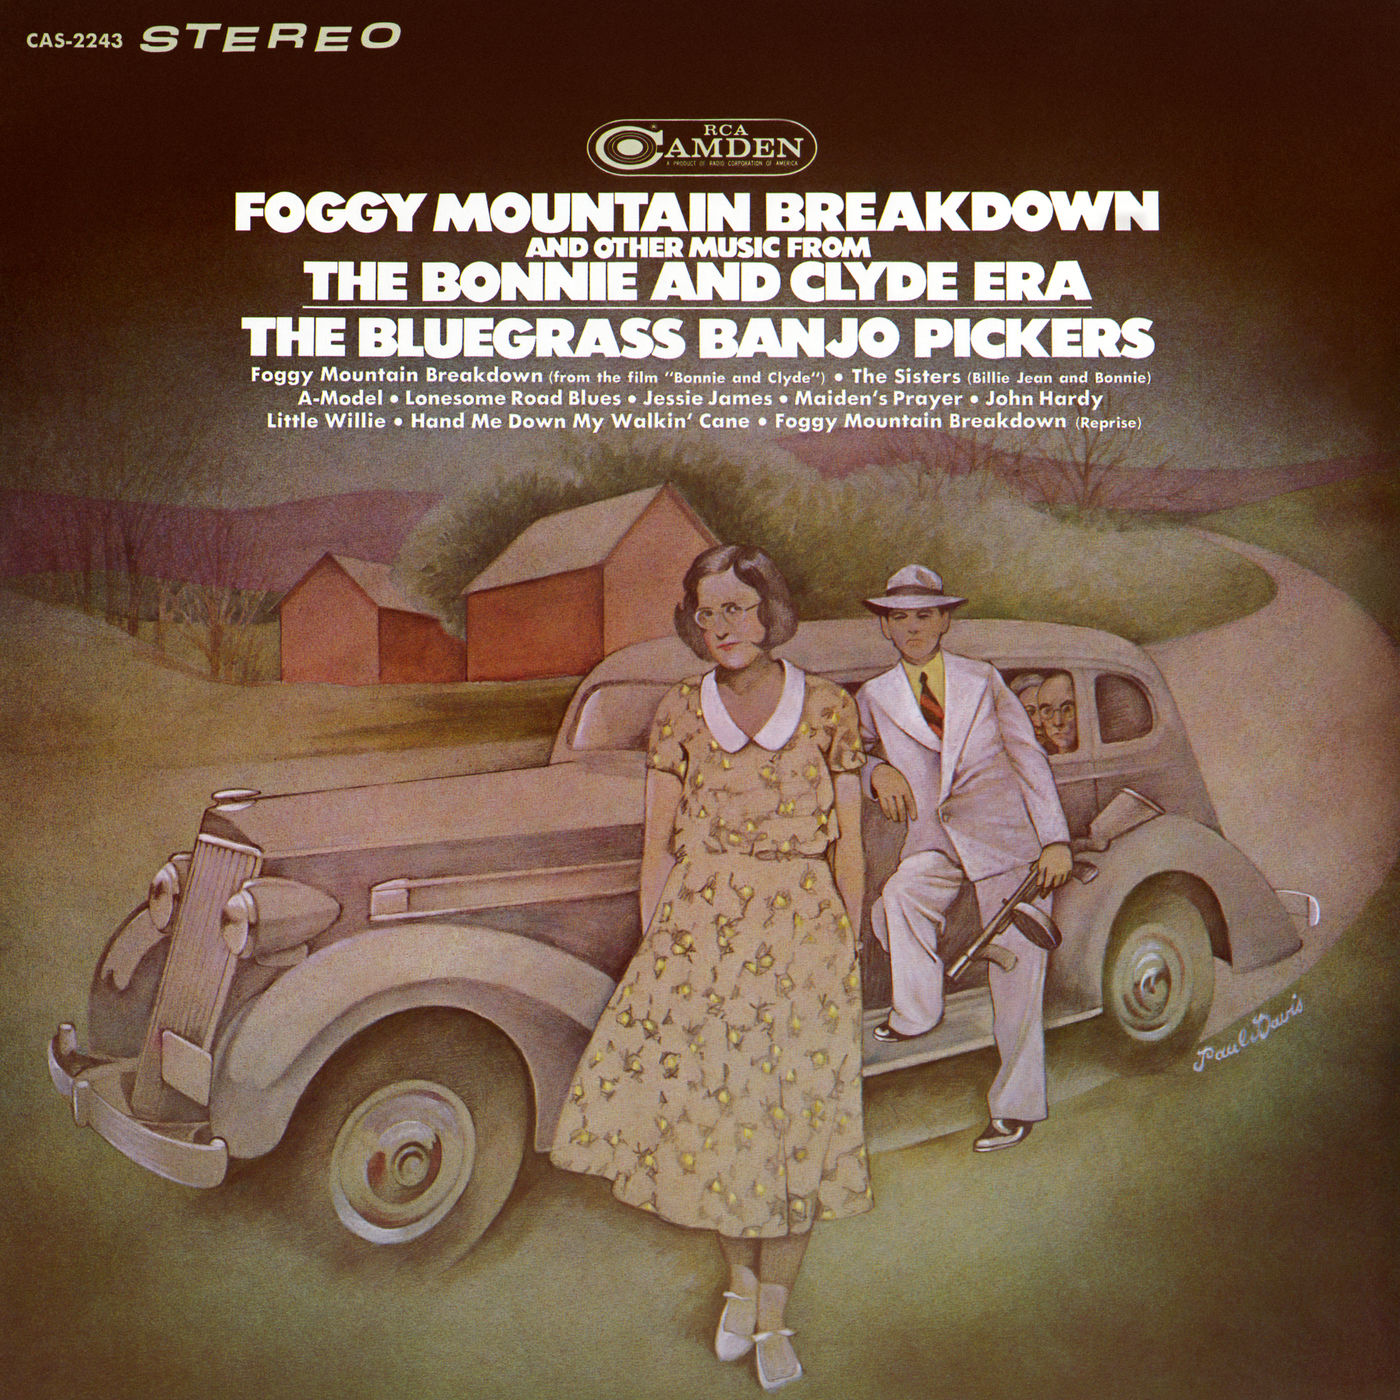 The Bluegrass Banjo Pickers – Foggy Mountain Breakdown and Other Music from the Bonnie and Clyde Era